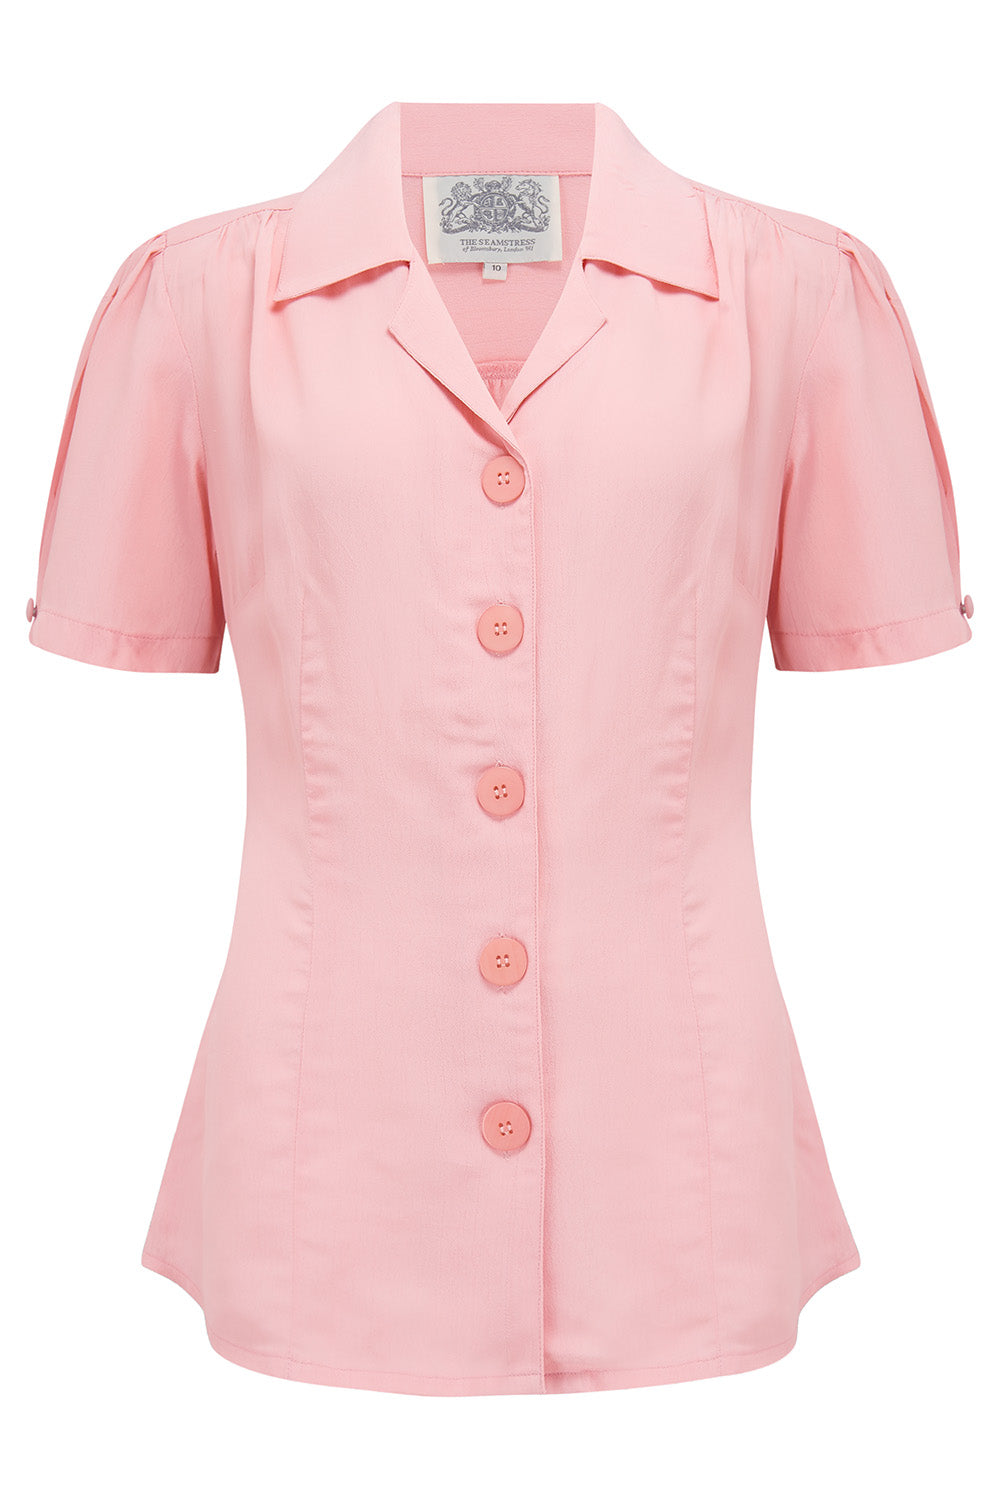 "Grace" Blouse in Pink Blossom , Classic 1940s Vintage Style - True and authentic vintage style clothing, inspired by the Classic styles of CC41 , WW2 and the fun 1950s RocknRoll era, for everyday wear plus events like Goodwood Revival, Twinwood Festival and Viva Las Vegas Rockabilly Weekend Rock n Romance The Seamstress Of Bloomsbury